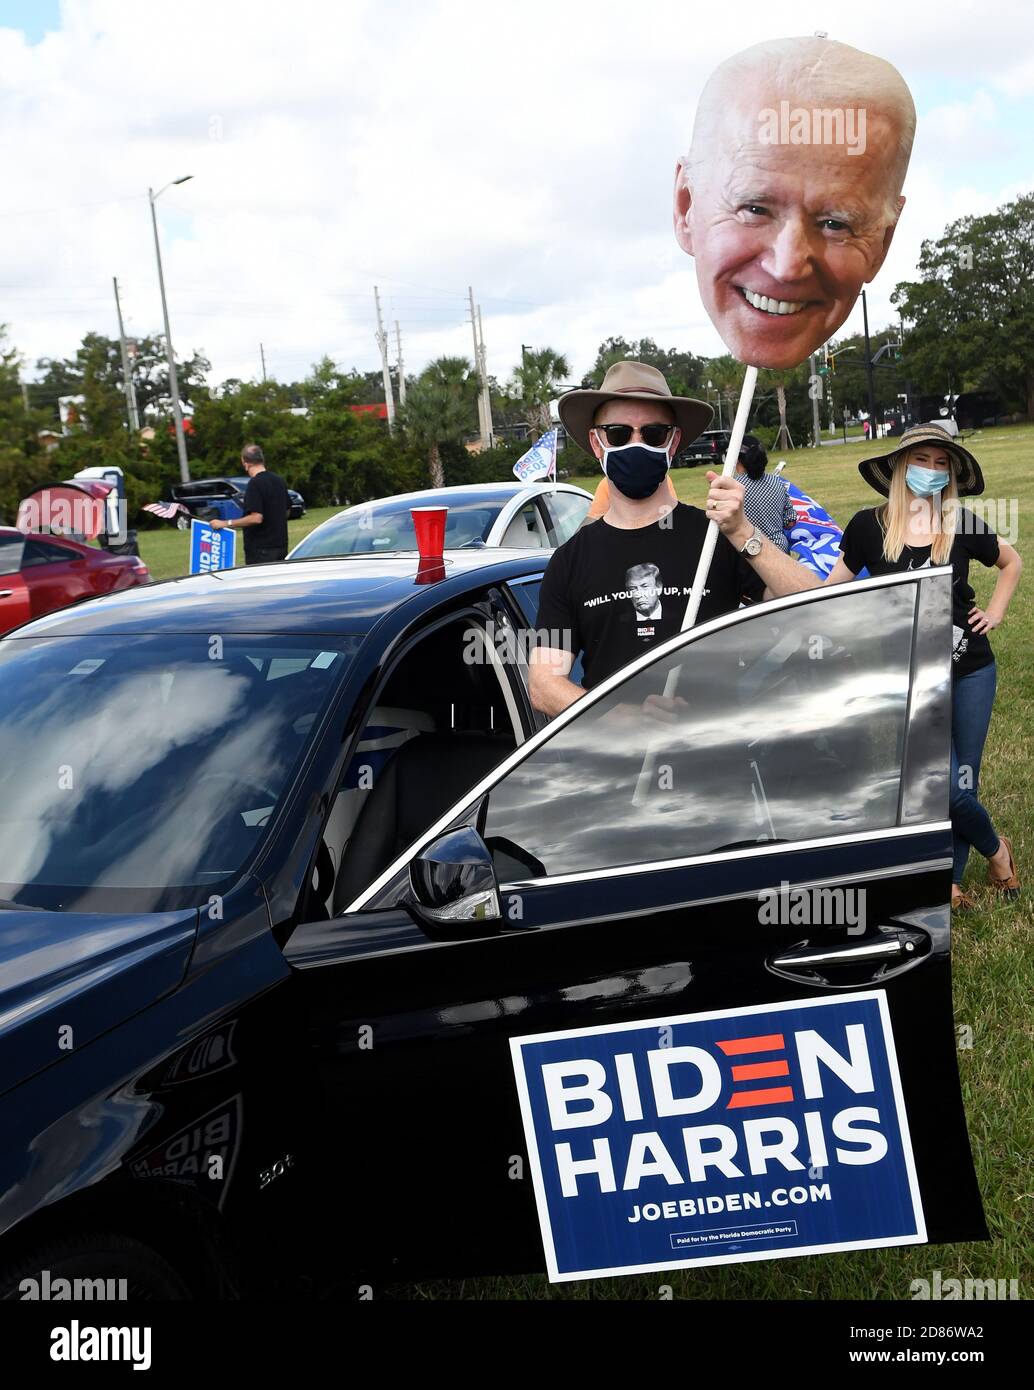 October 27, 2020 - Orlando, Florida, United States - A man holds a picture of Joe BidenÕs head while waiting for former U.S. President Barack Obama to speak in support of Democratic presidential nominee Joe Biden during a drive-in rally on October 27, 2020 in Orlando, Florida. Mr. Obama is campaigning for his former Vice President before the Nov. 3rd election. (Paul Hennessy/Alamy) Stock Photo